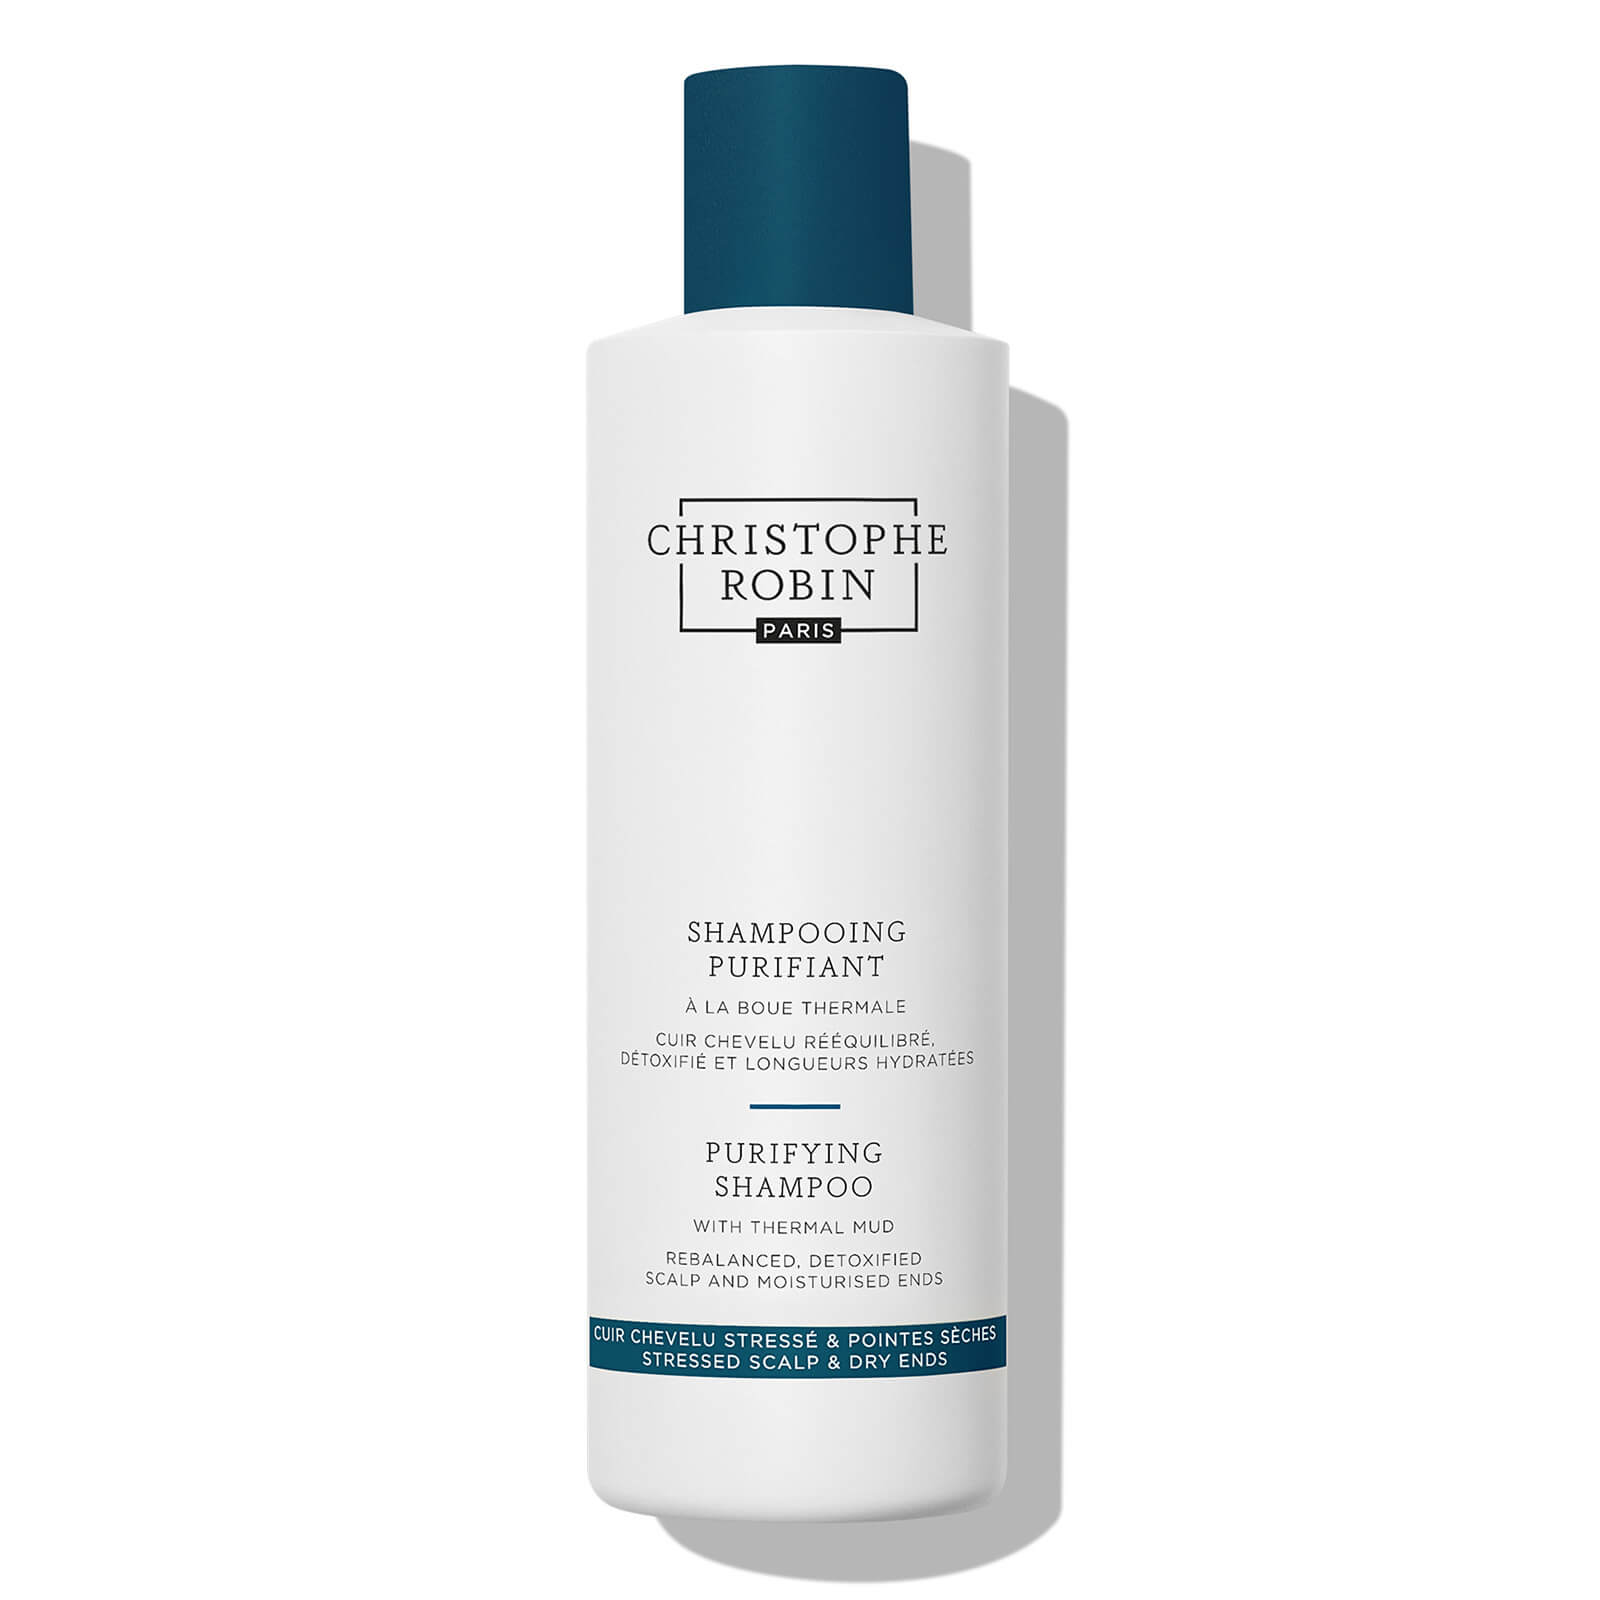 Christophe Robin Purifying Shampoo with Thermal Mud 250ml von Christophe Robin